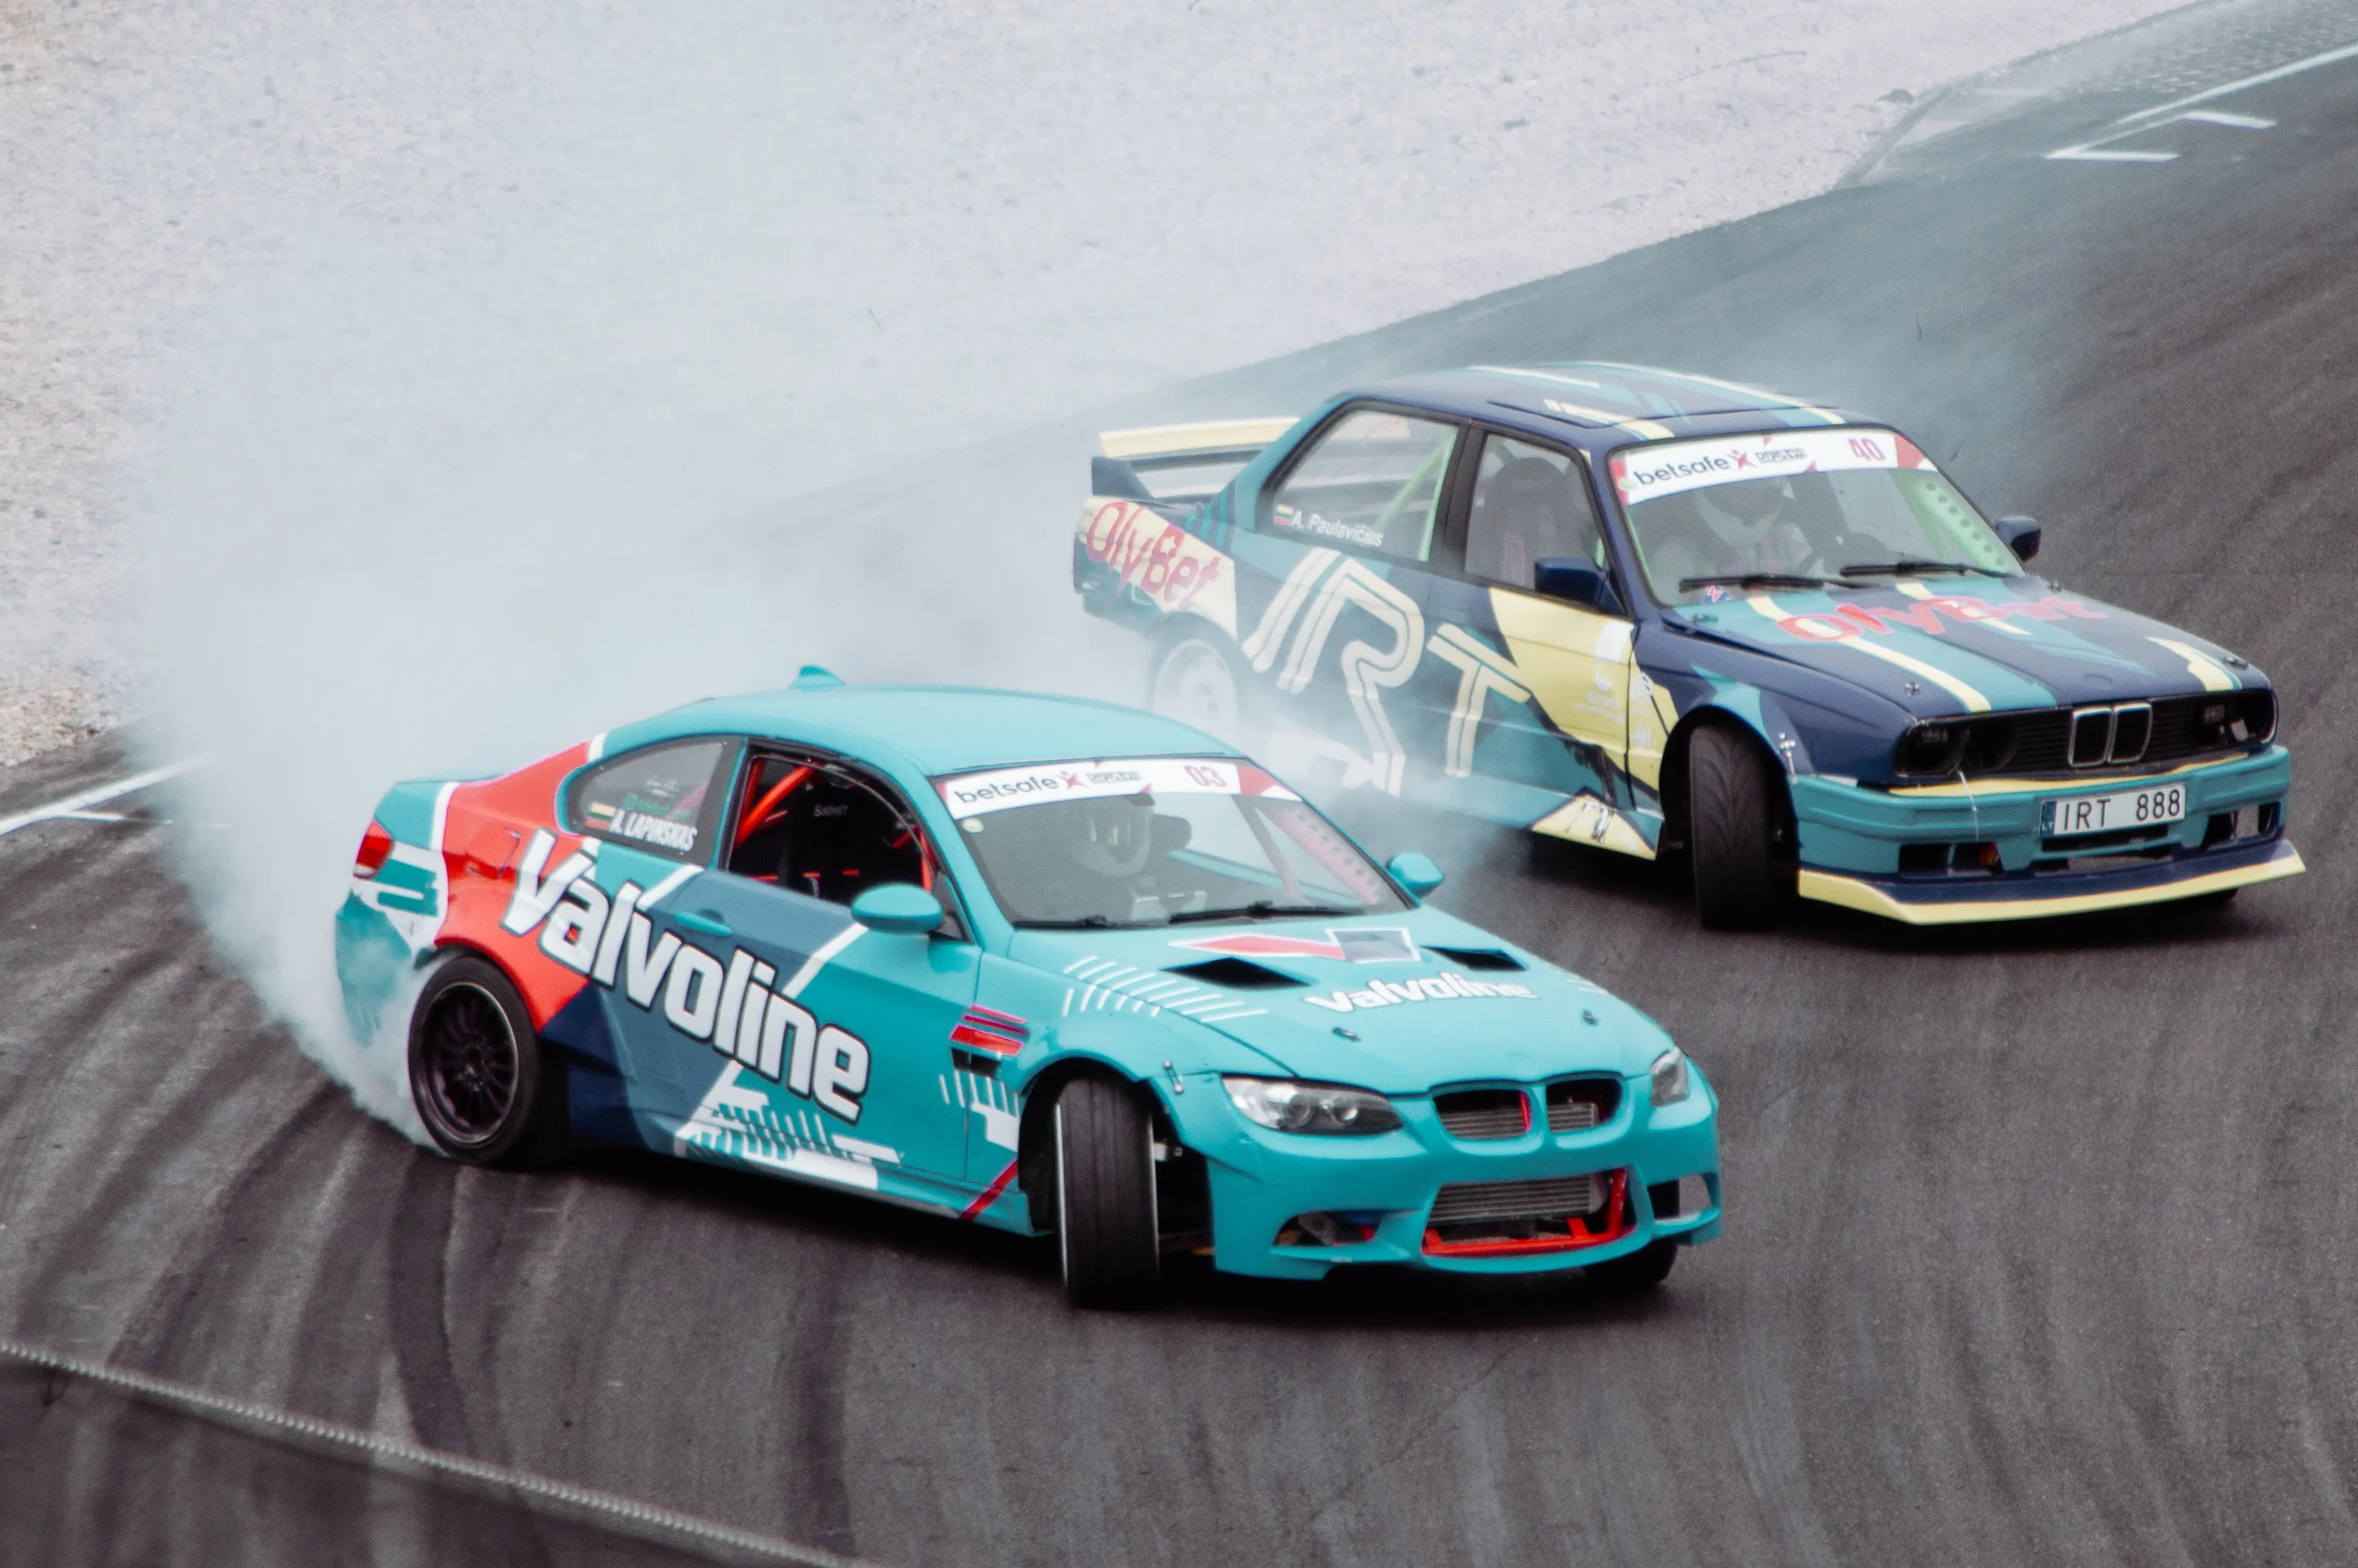 Two highly modified BMWs, an E92 and E30, drifting on track.